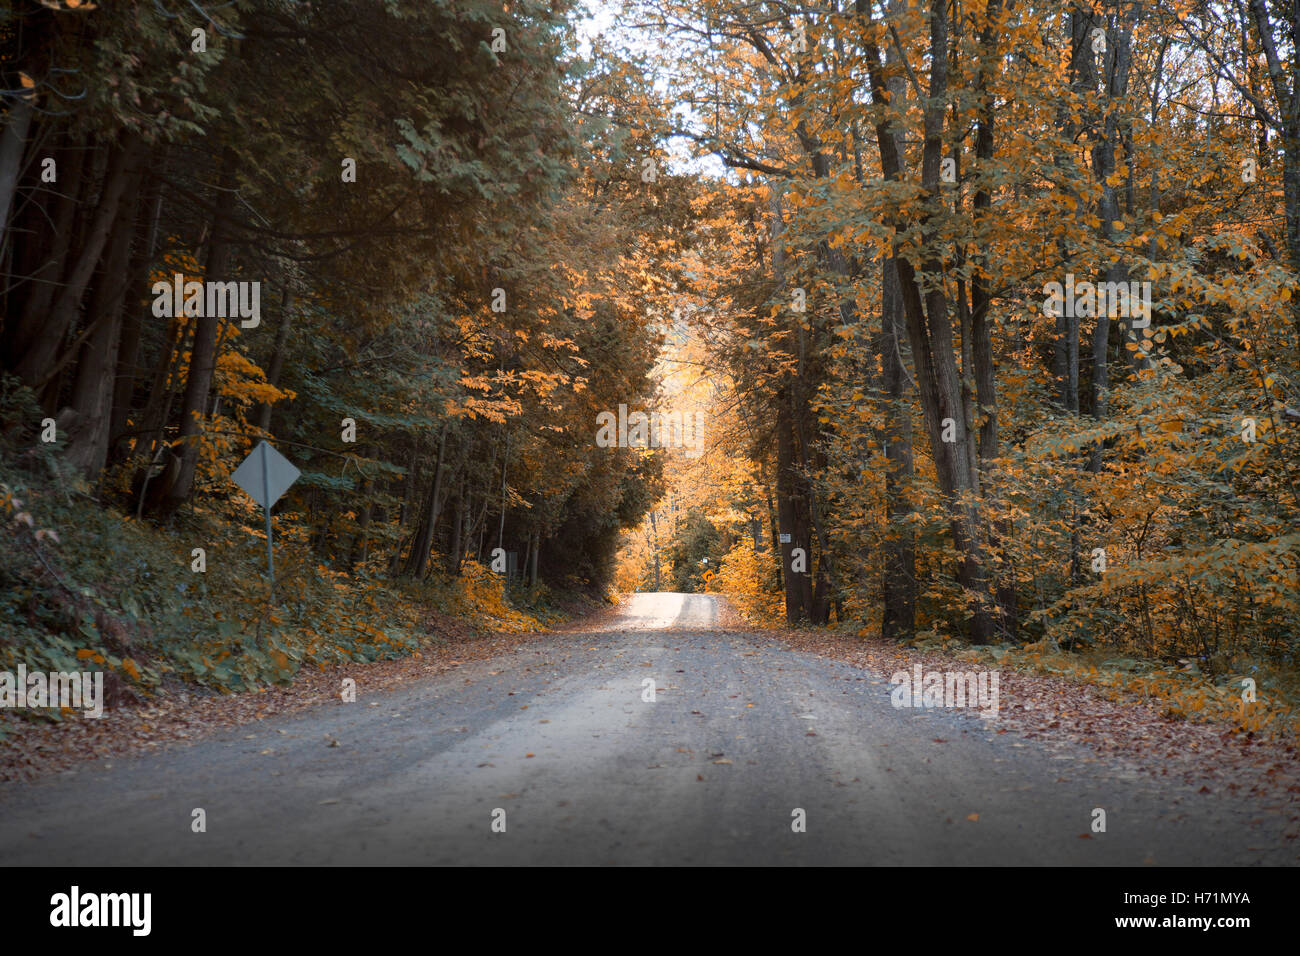 autumn road with colorful leaves Stock Photo